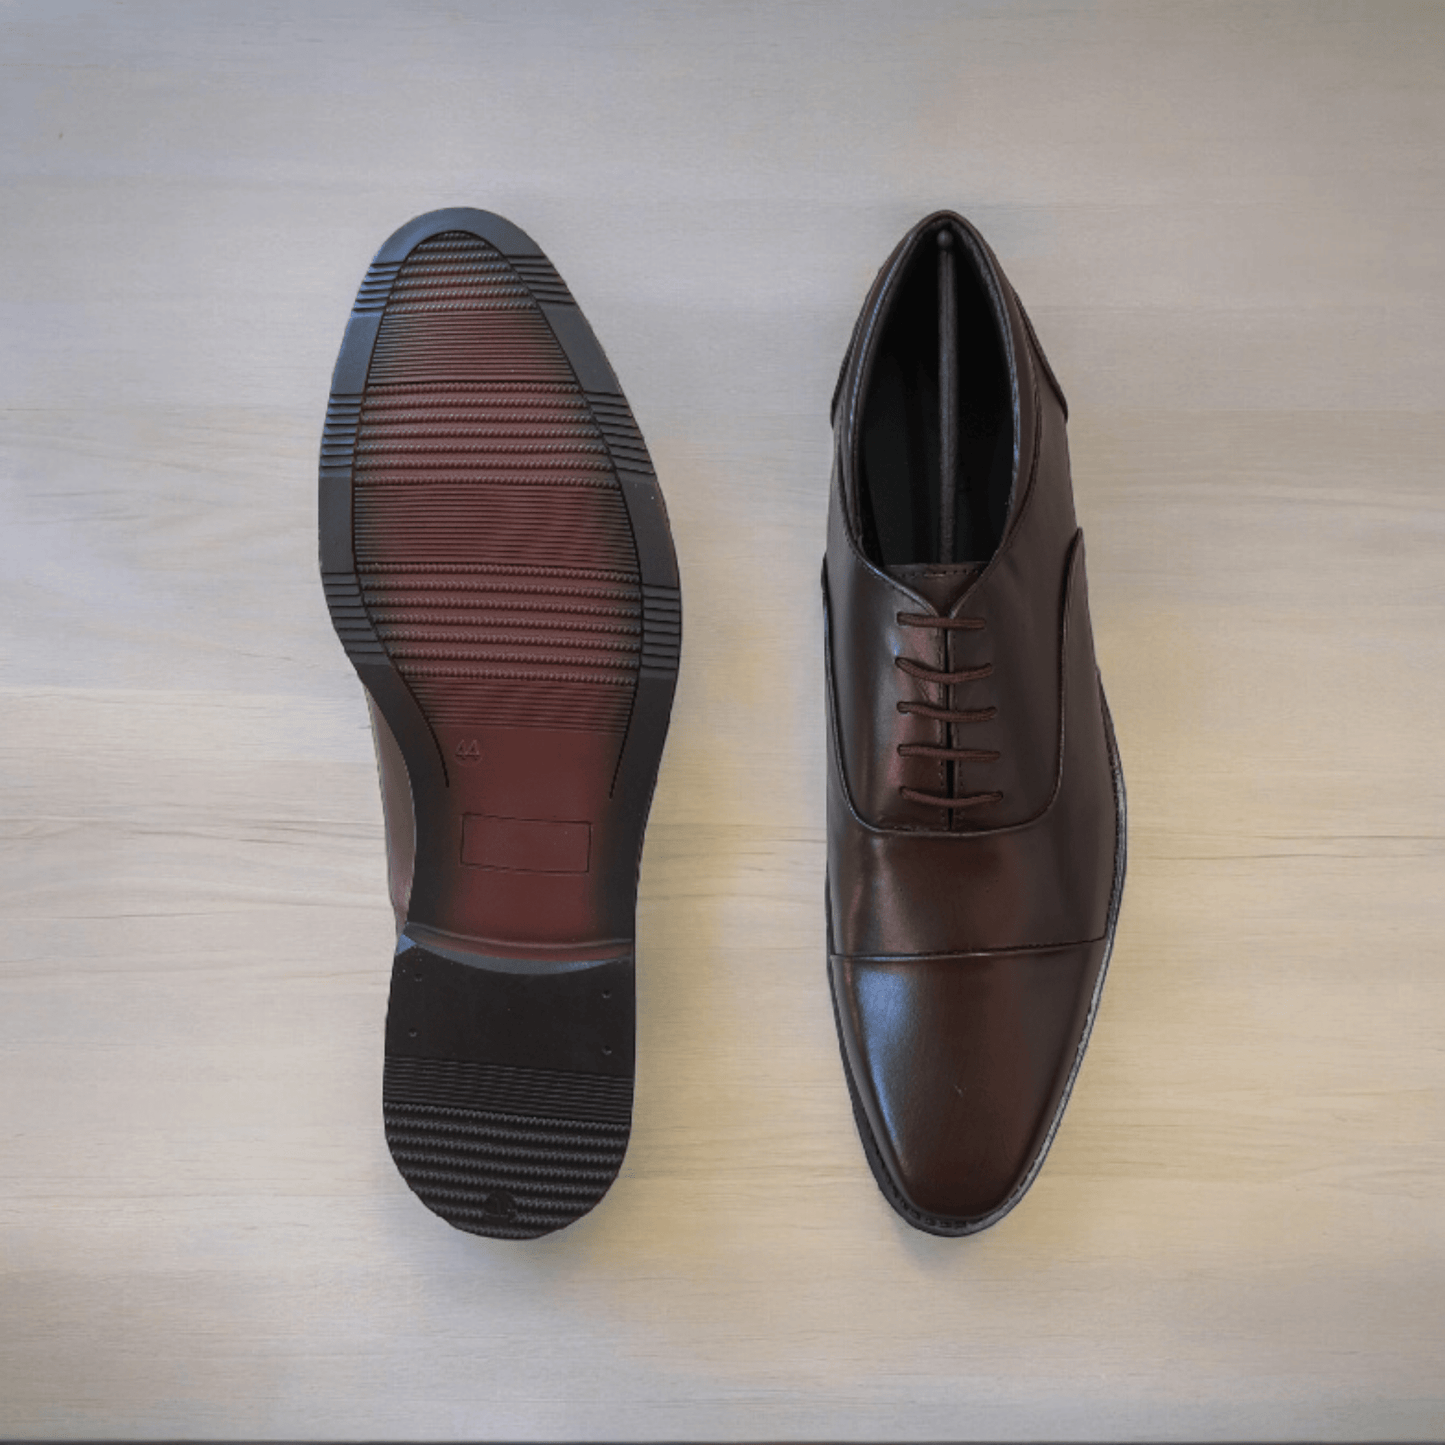 brown oxford shoes for men